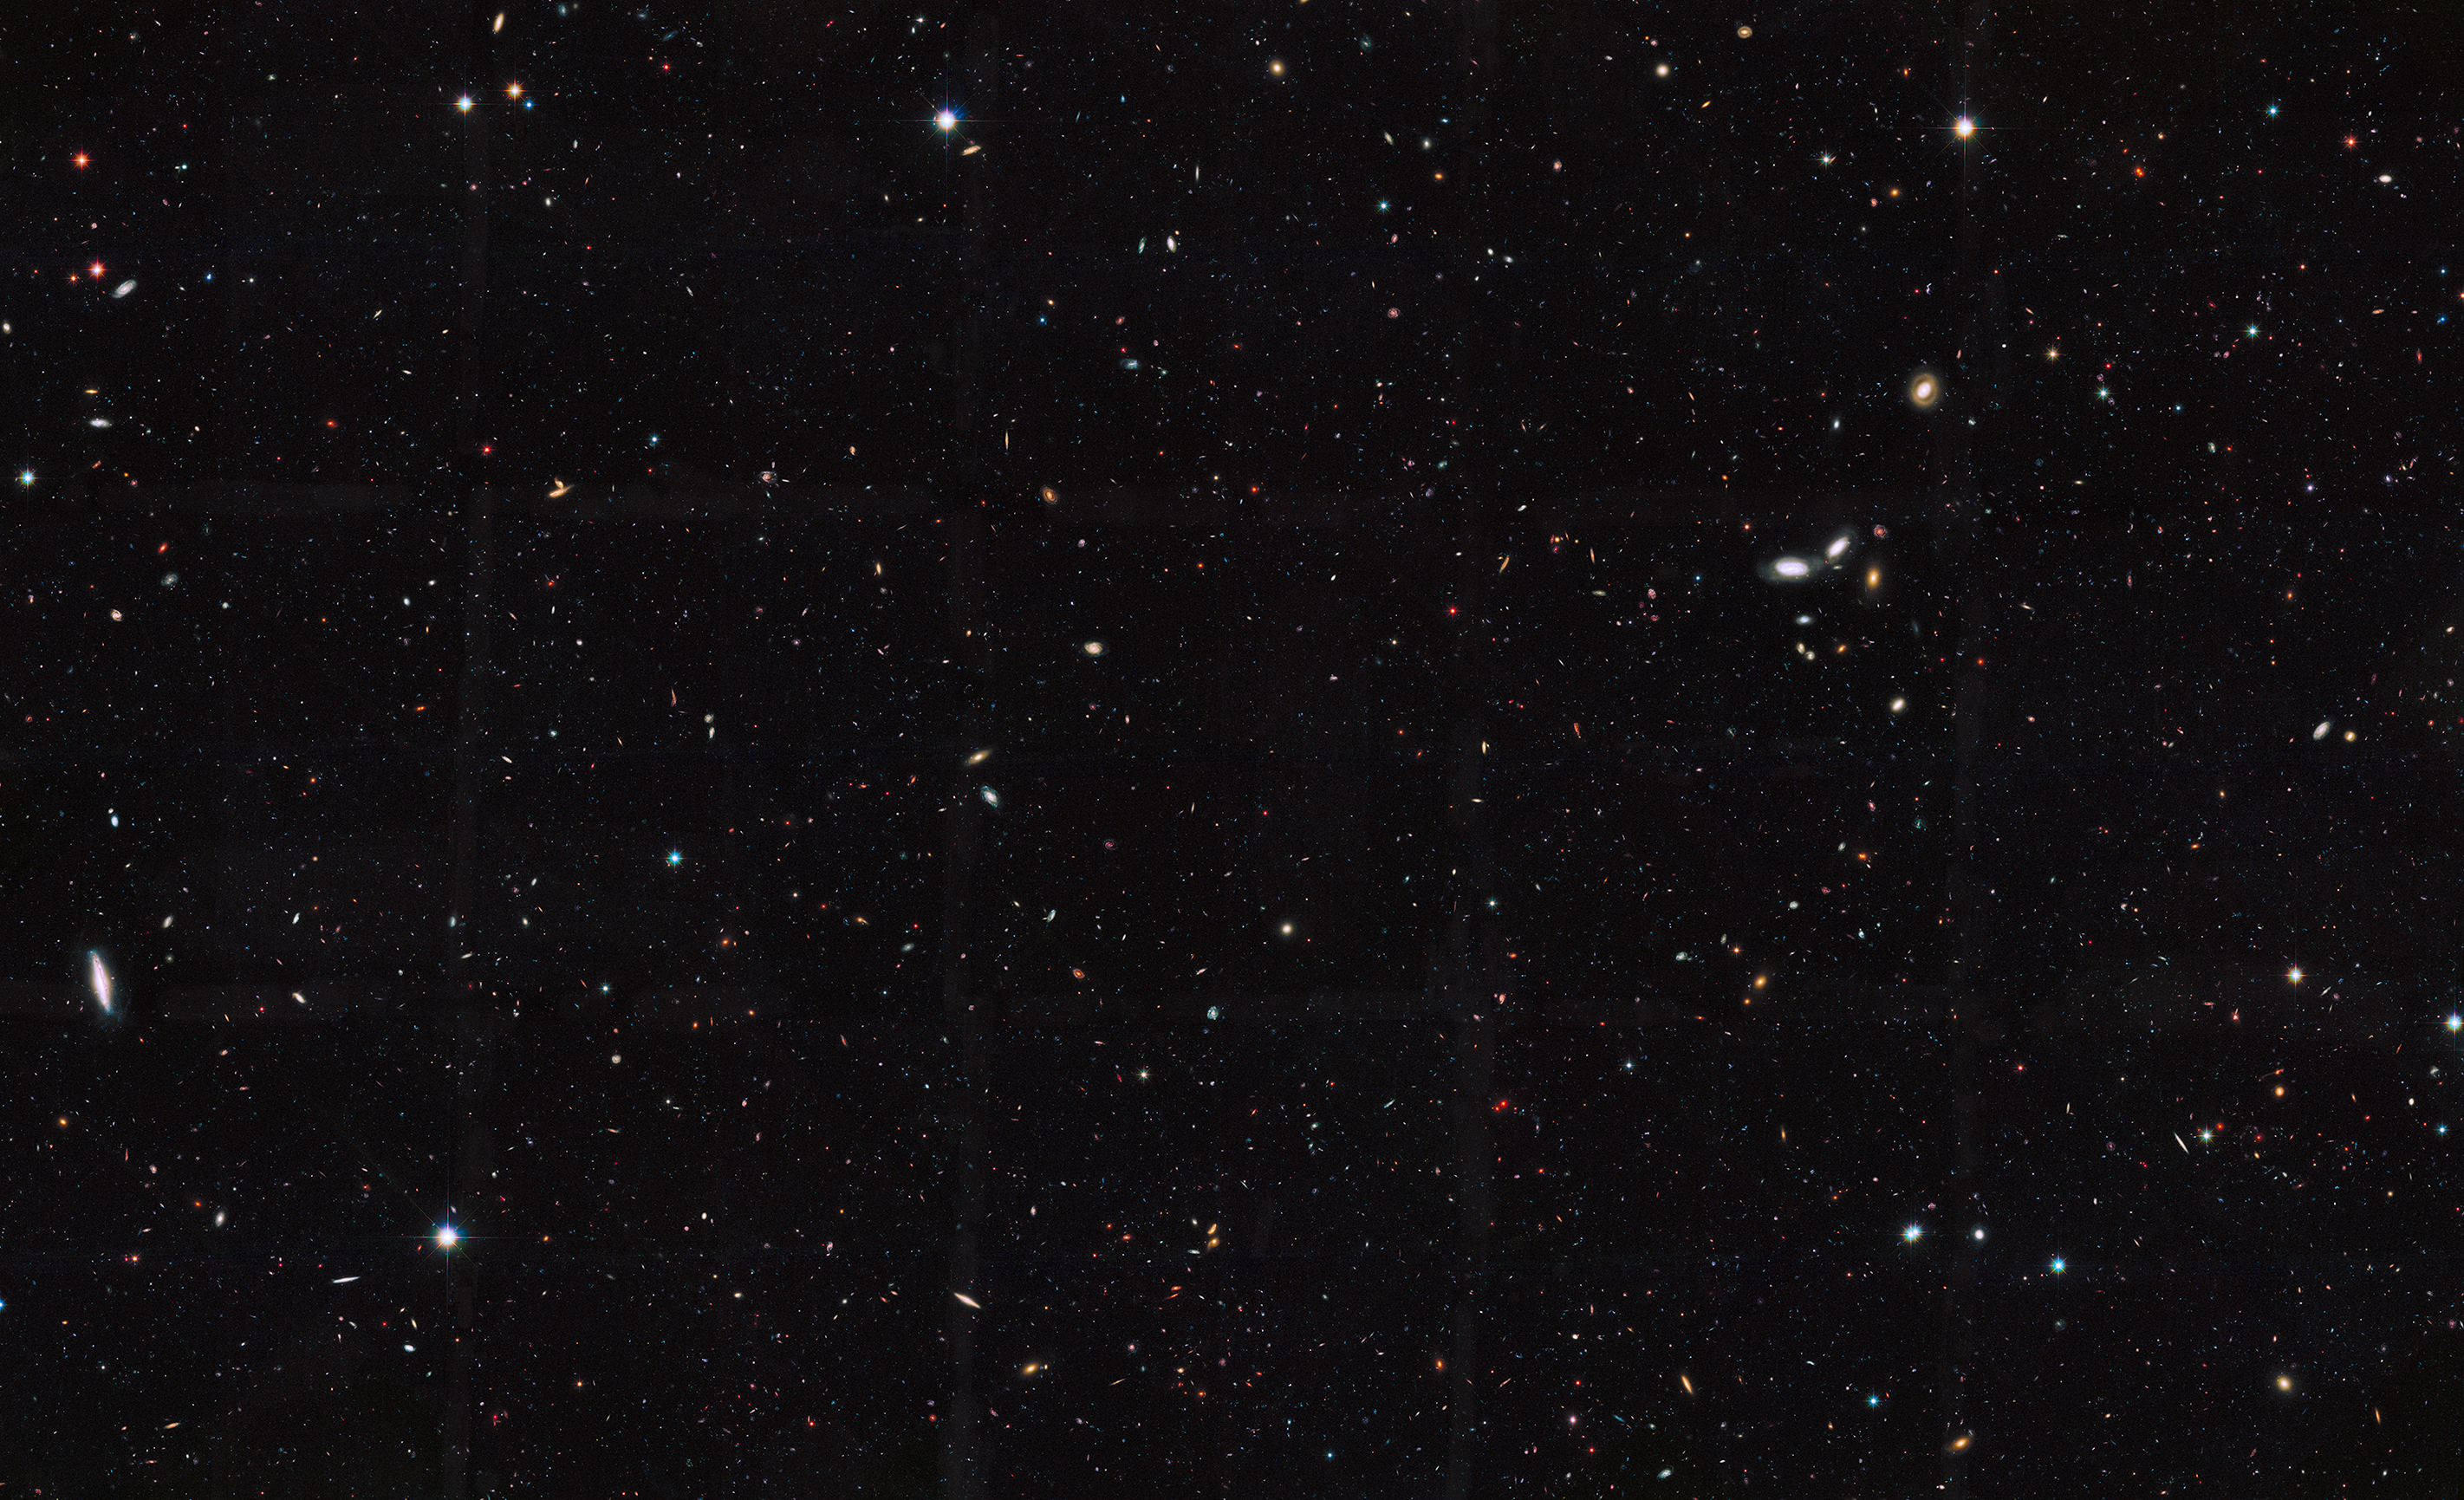 Hubble Finds 10 Times More Galaxies Than Thought | NASA